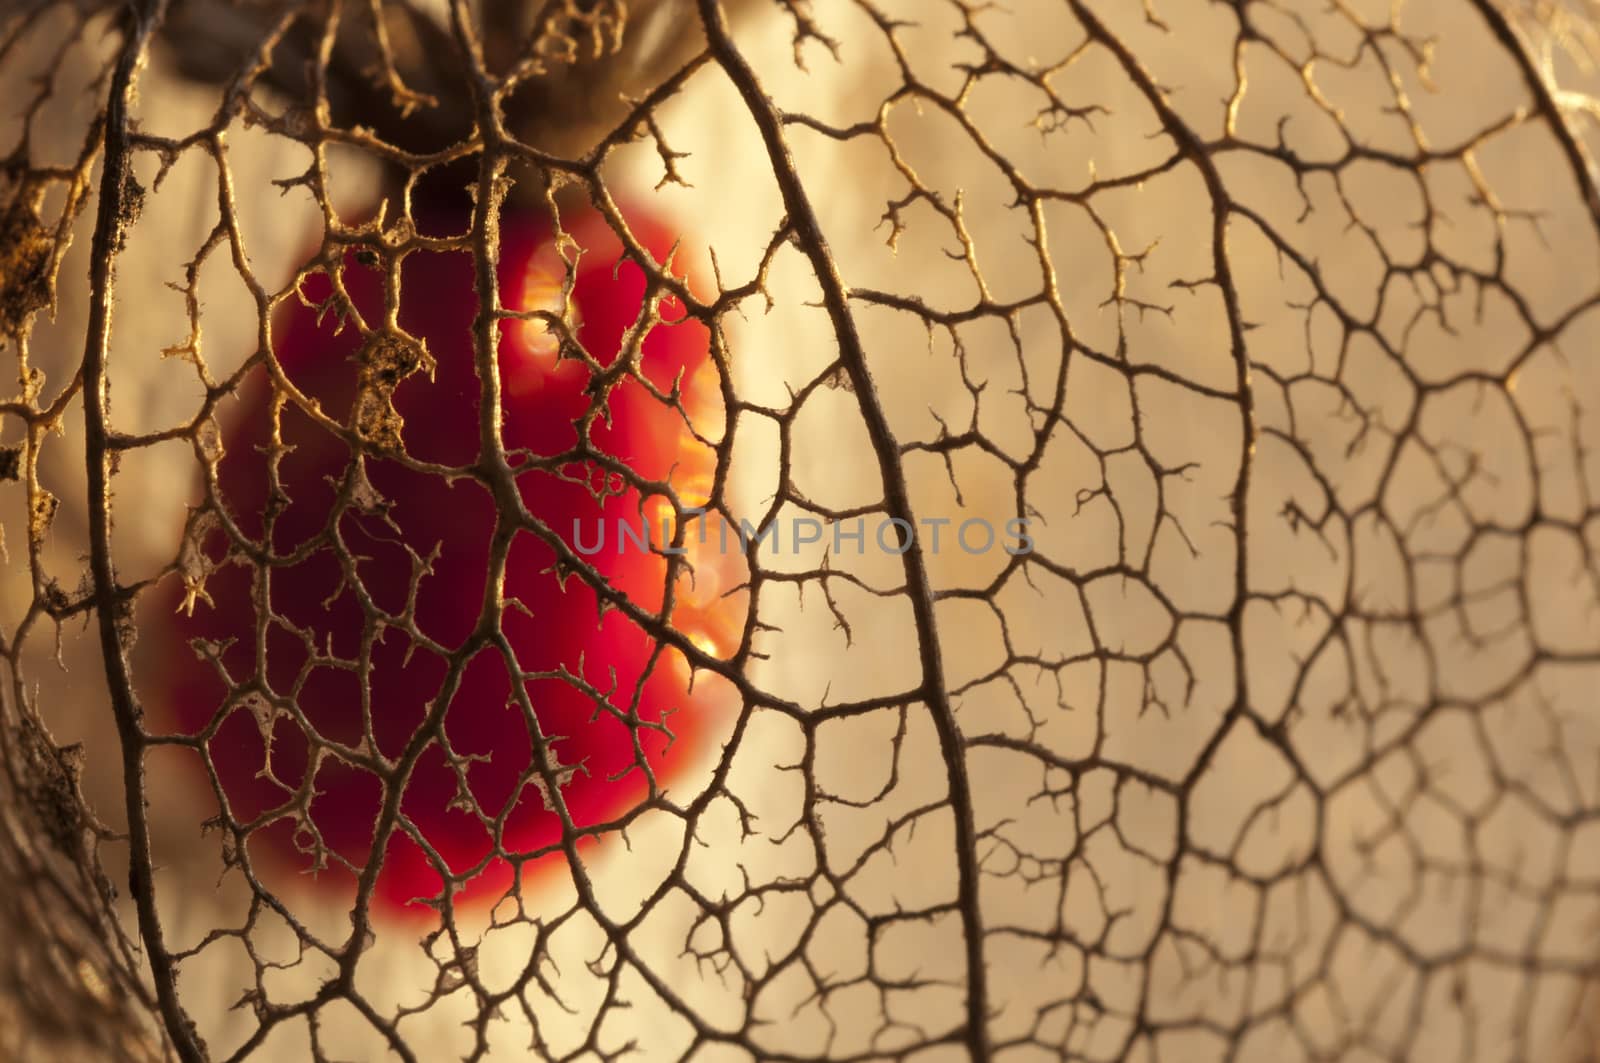 Dried Physalis lantern by dred